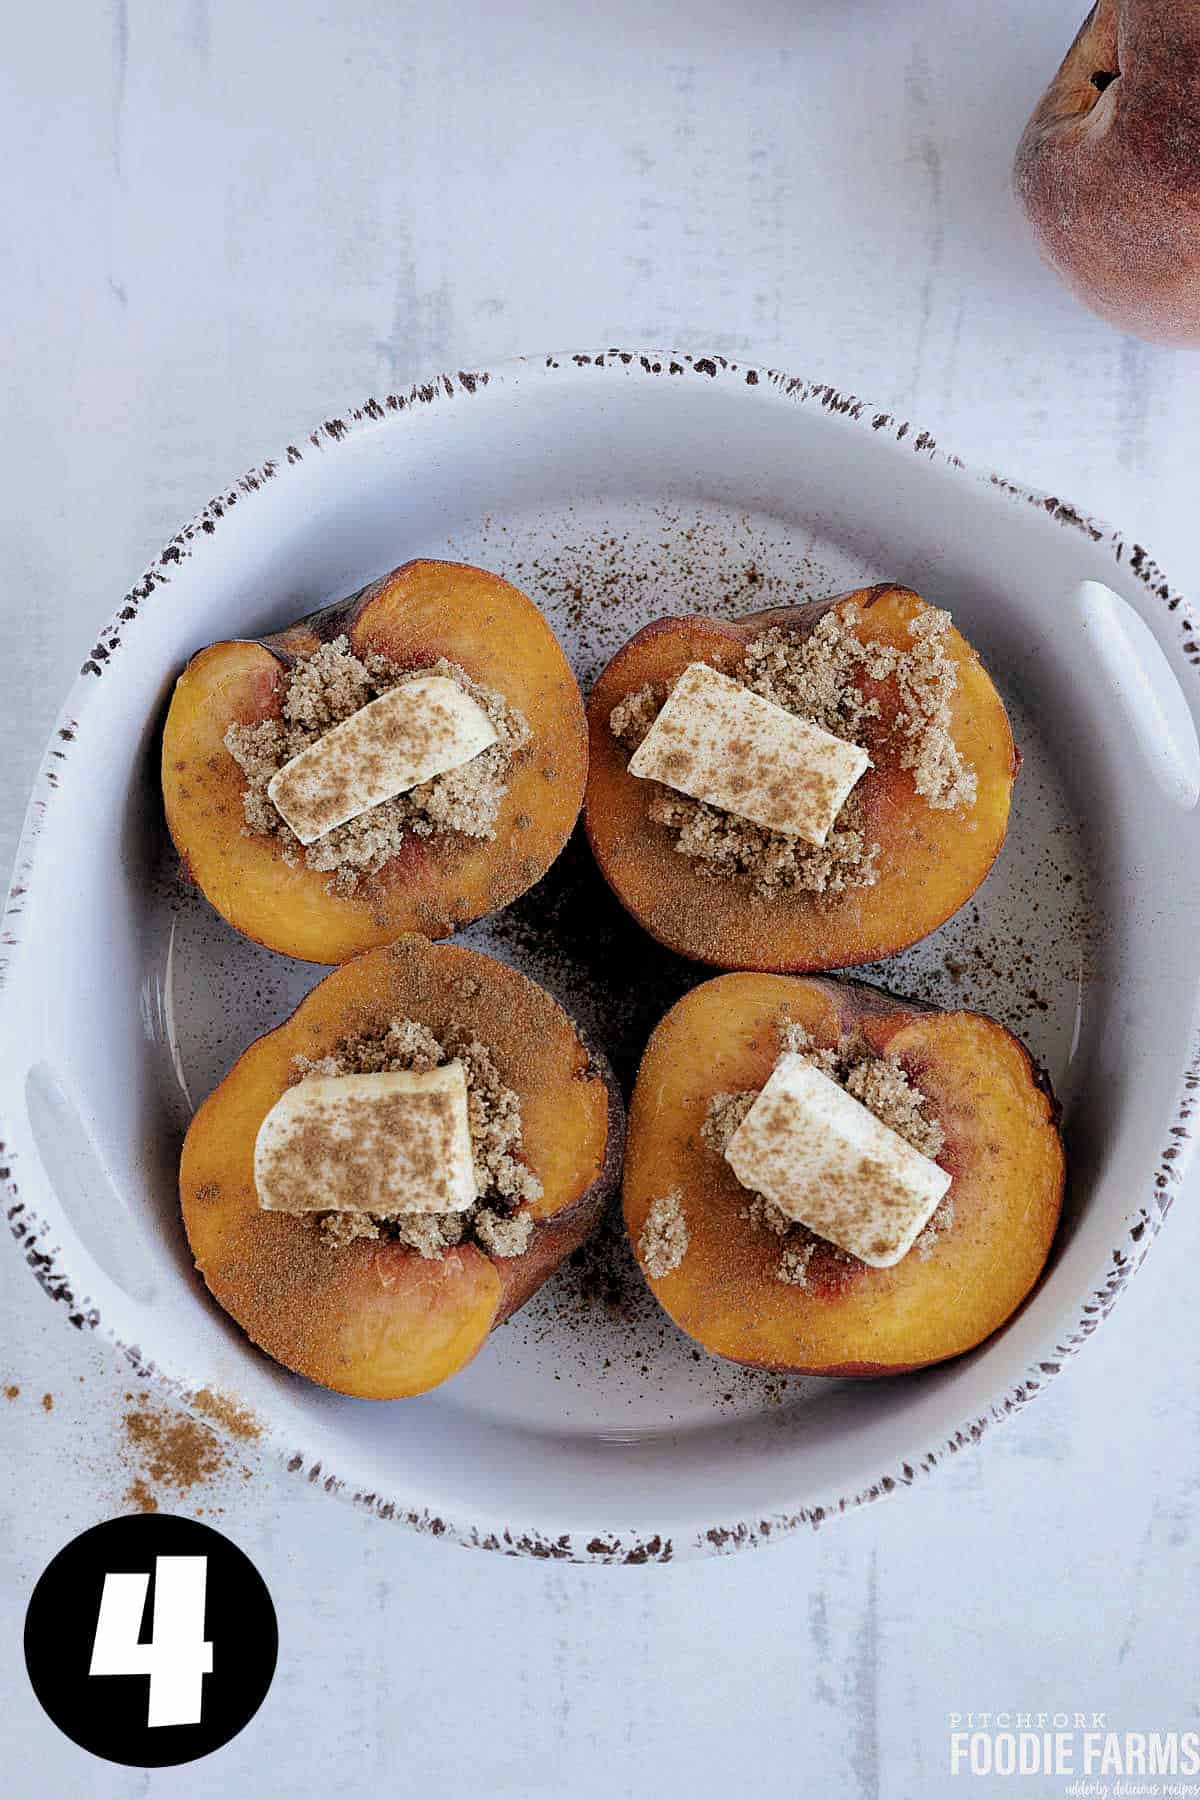 Peaches cut in half with butter, brown sugar, and cinnamon in an oven proof dish.